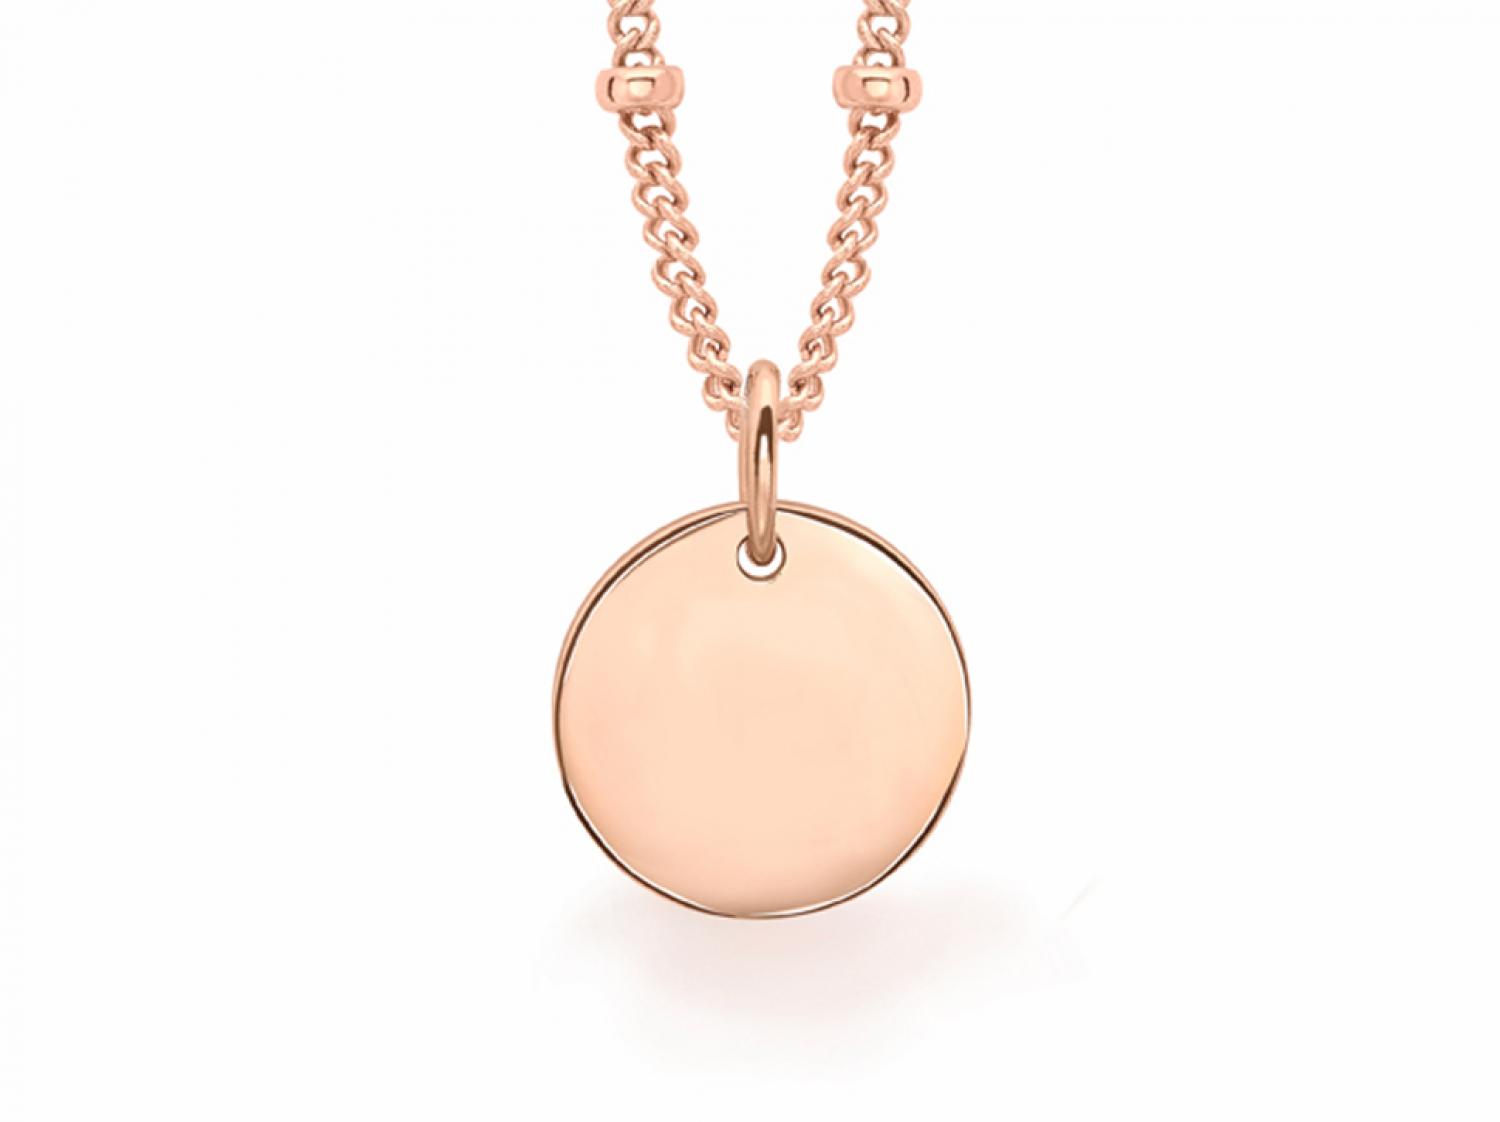 Lyst - Missoma Rose Gold Small Initial Necklace in Metallic